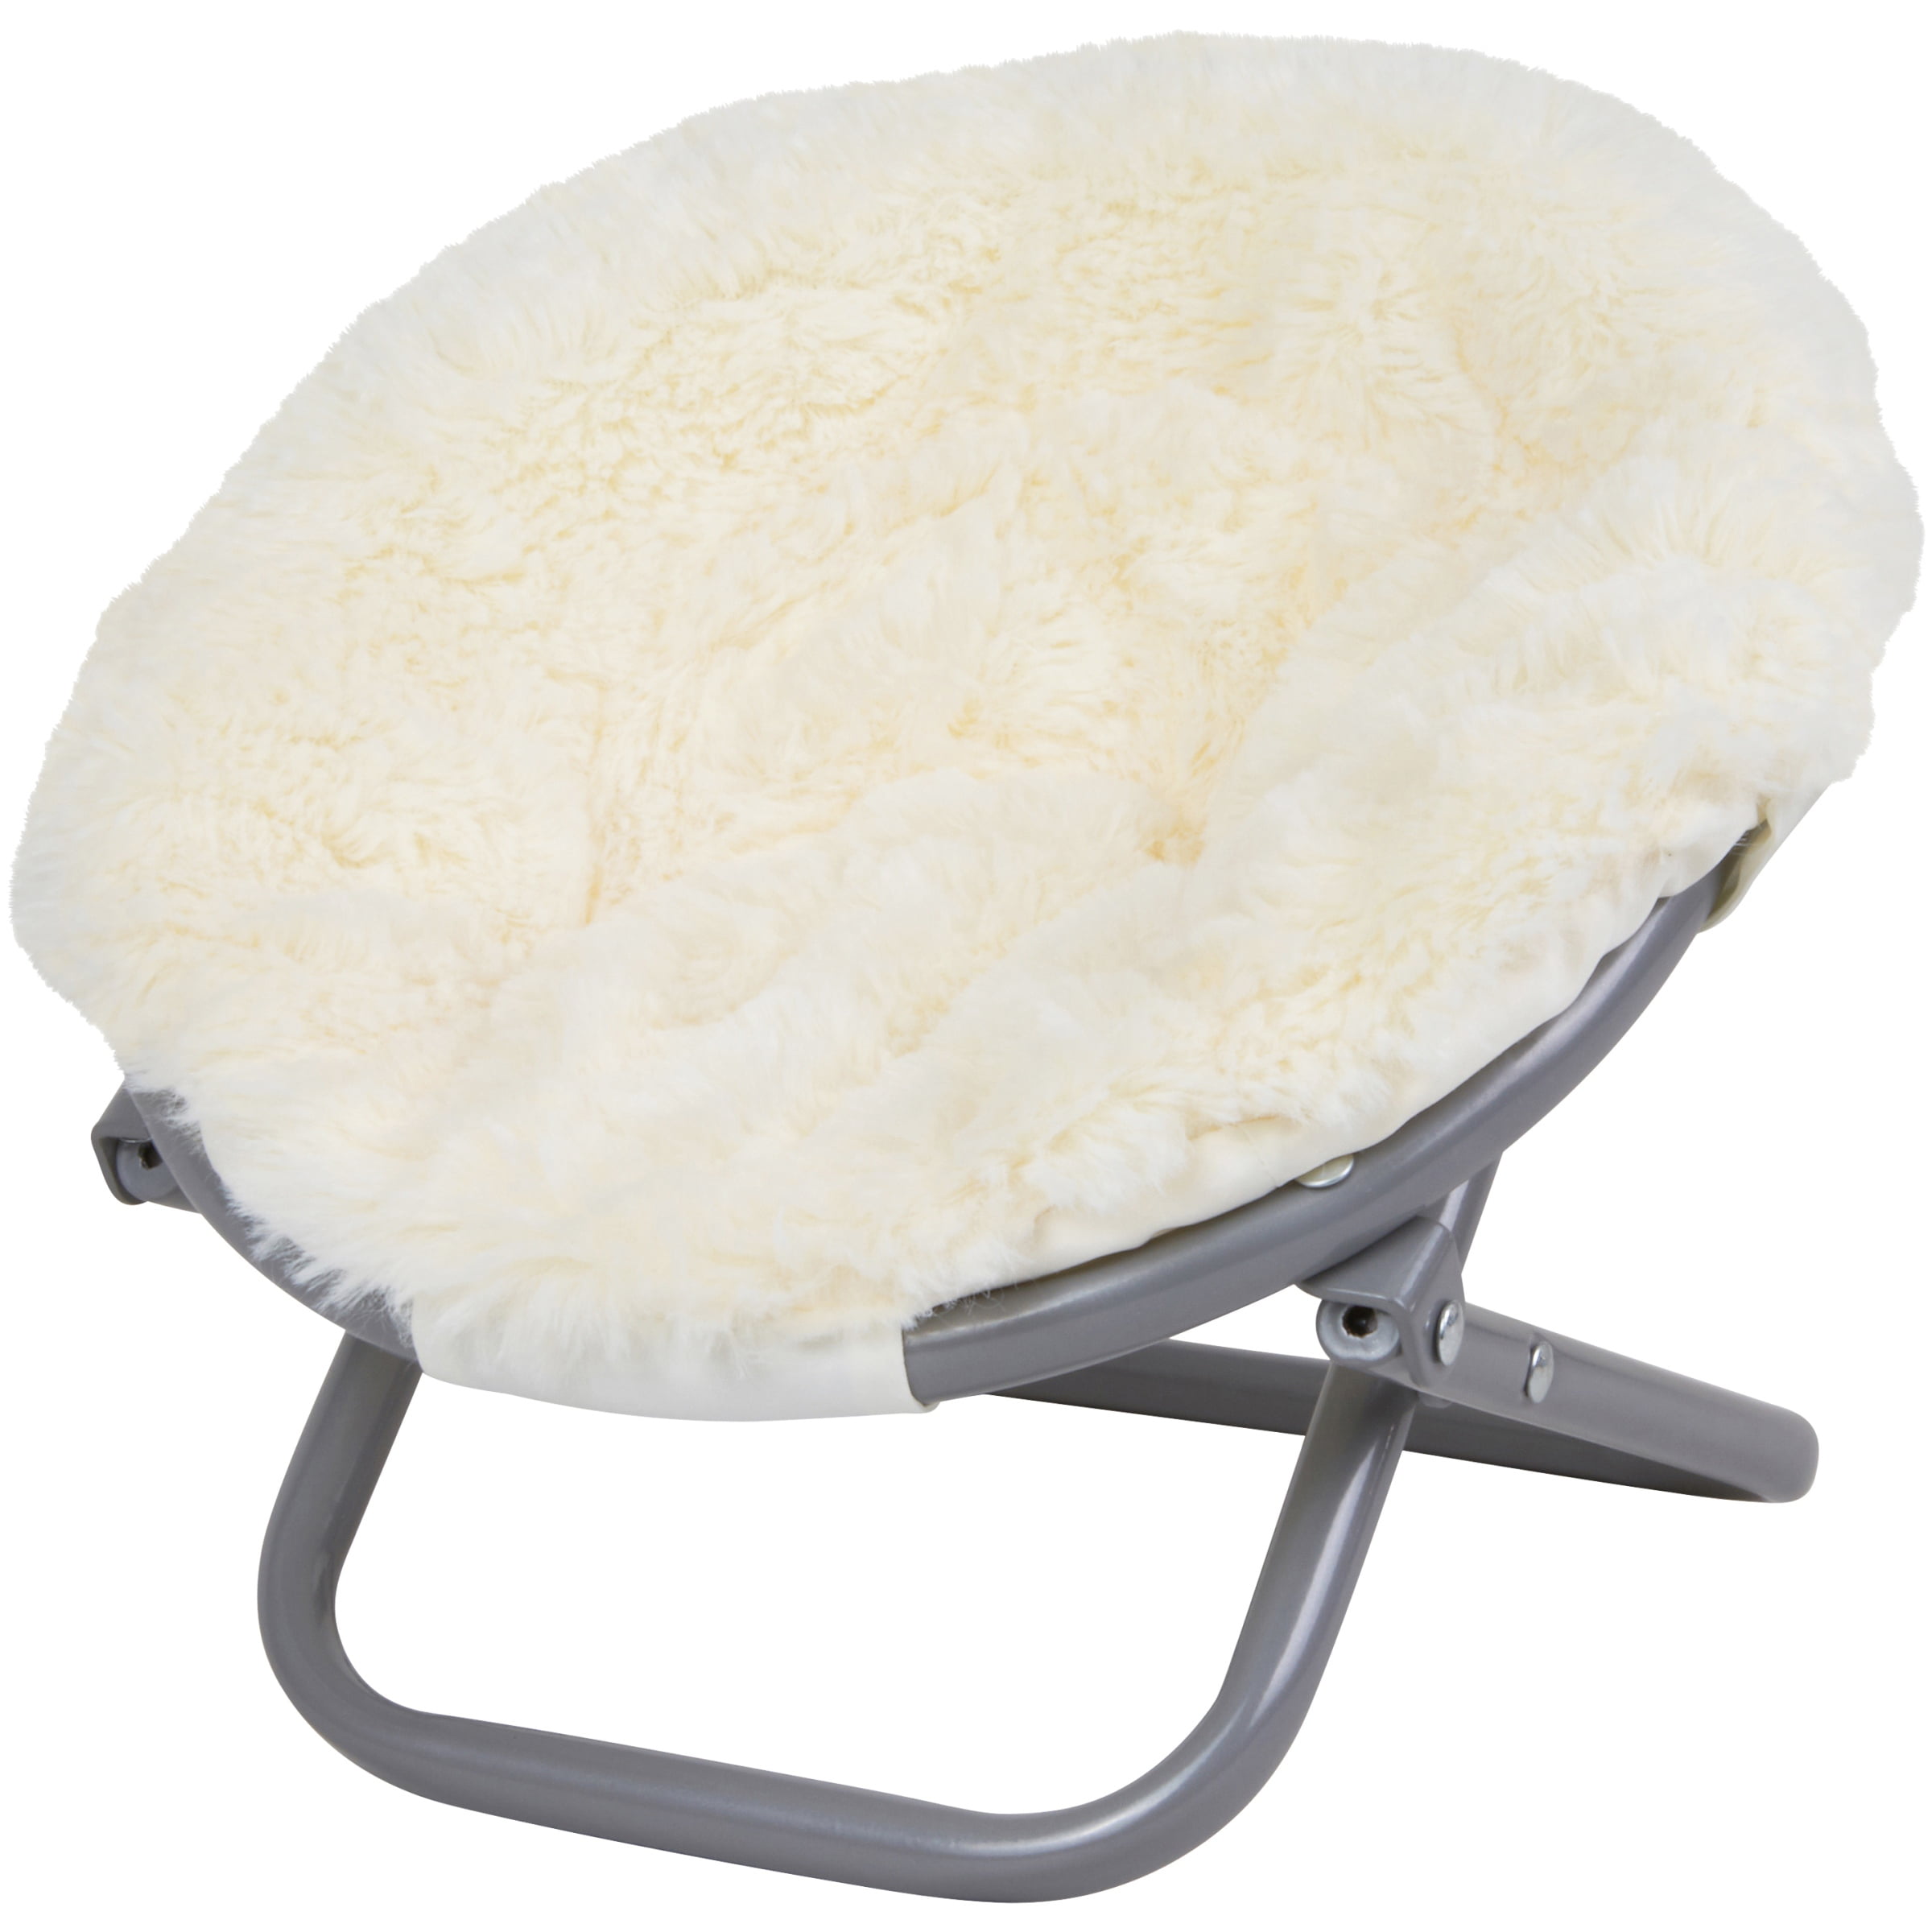 Featured image of post White Saucer Chair / Now if you prefer a saucer chair that is more stable without the folding design, the papasan chair comes highly recommended.